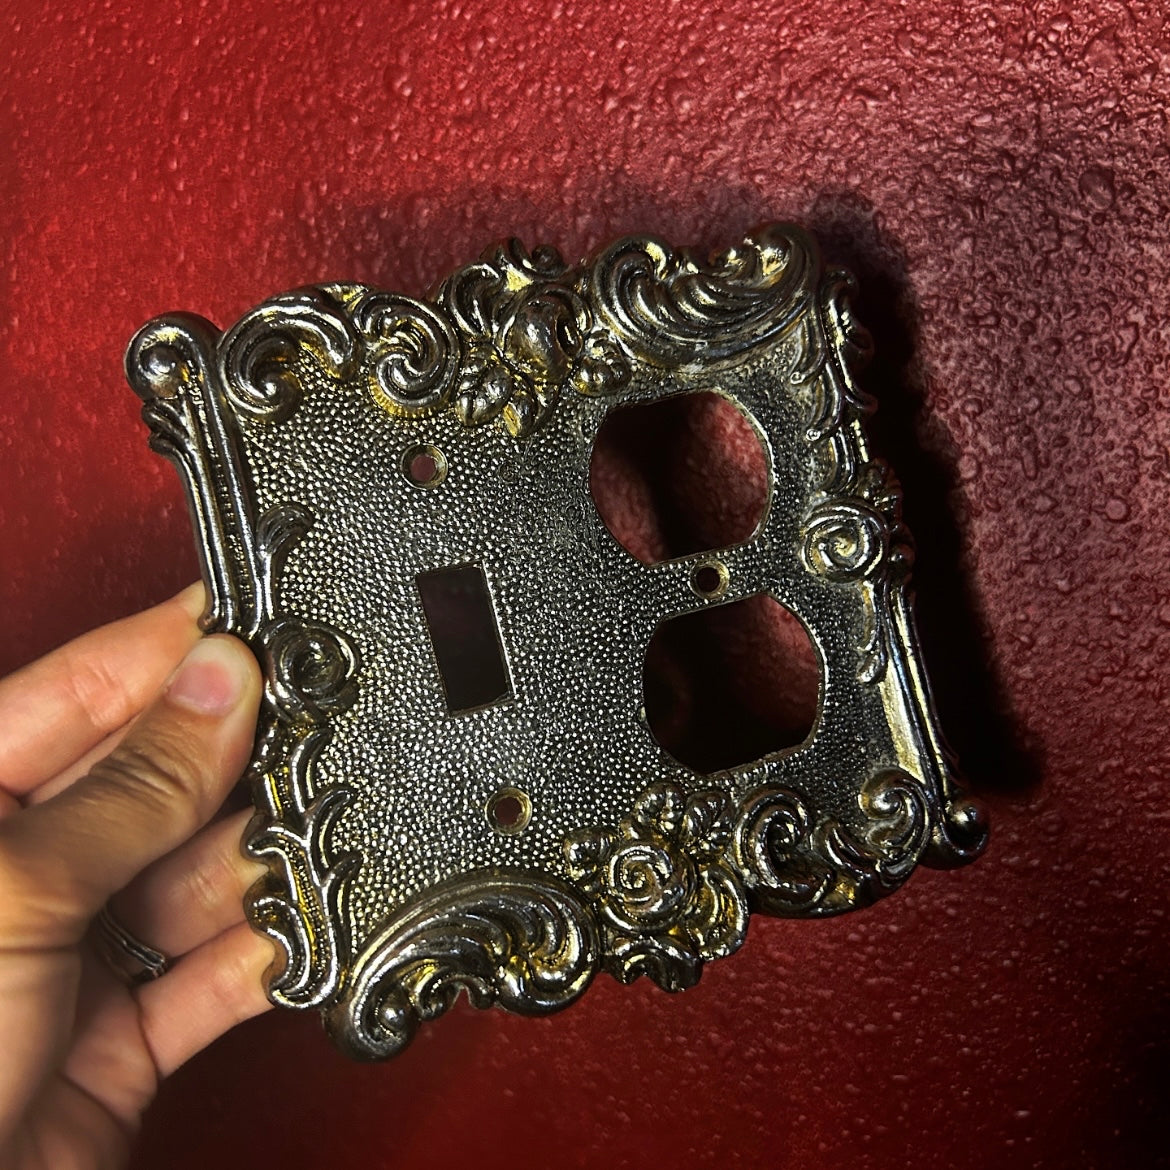 Ornate Light Switch & Outlet Cover